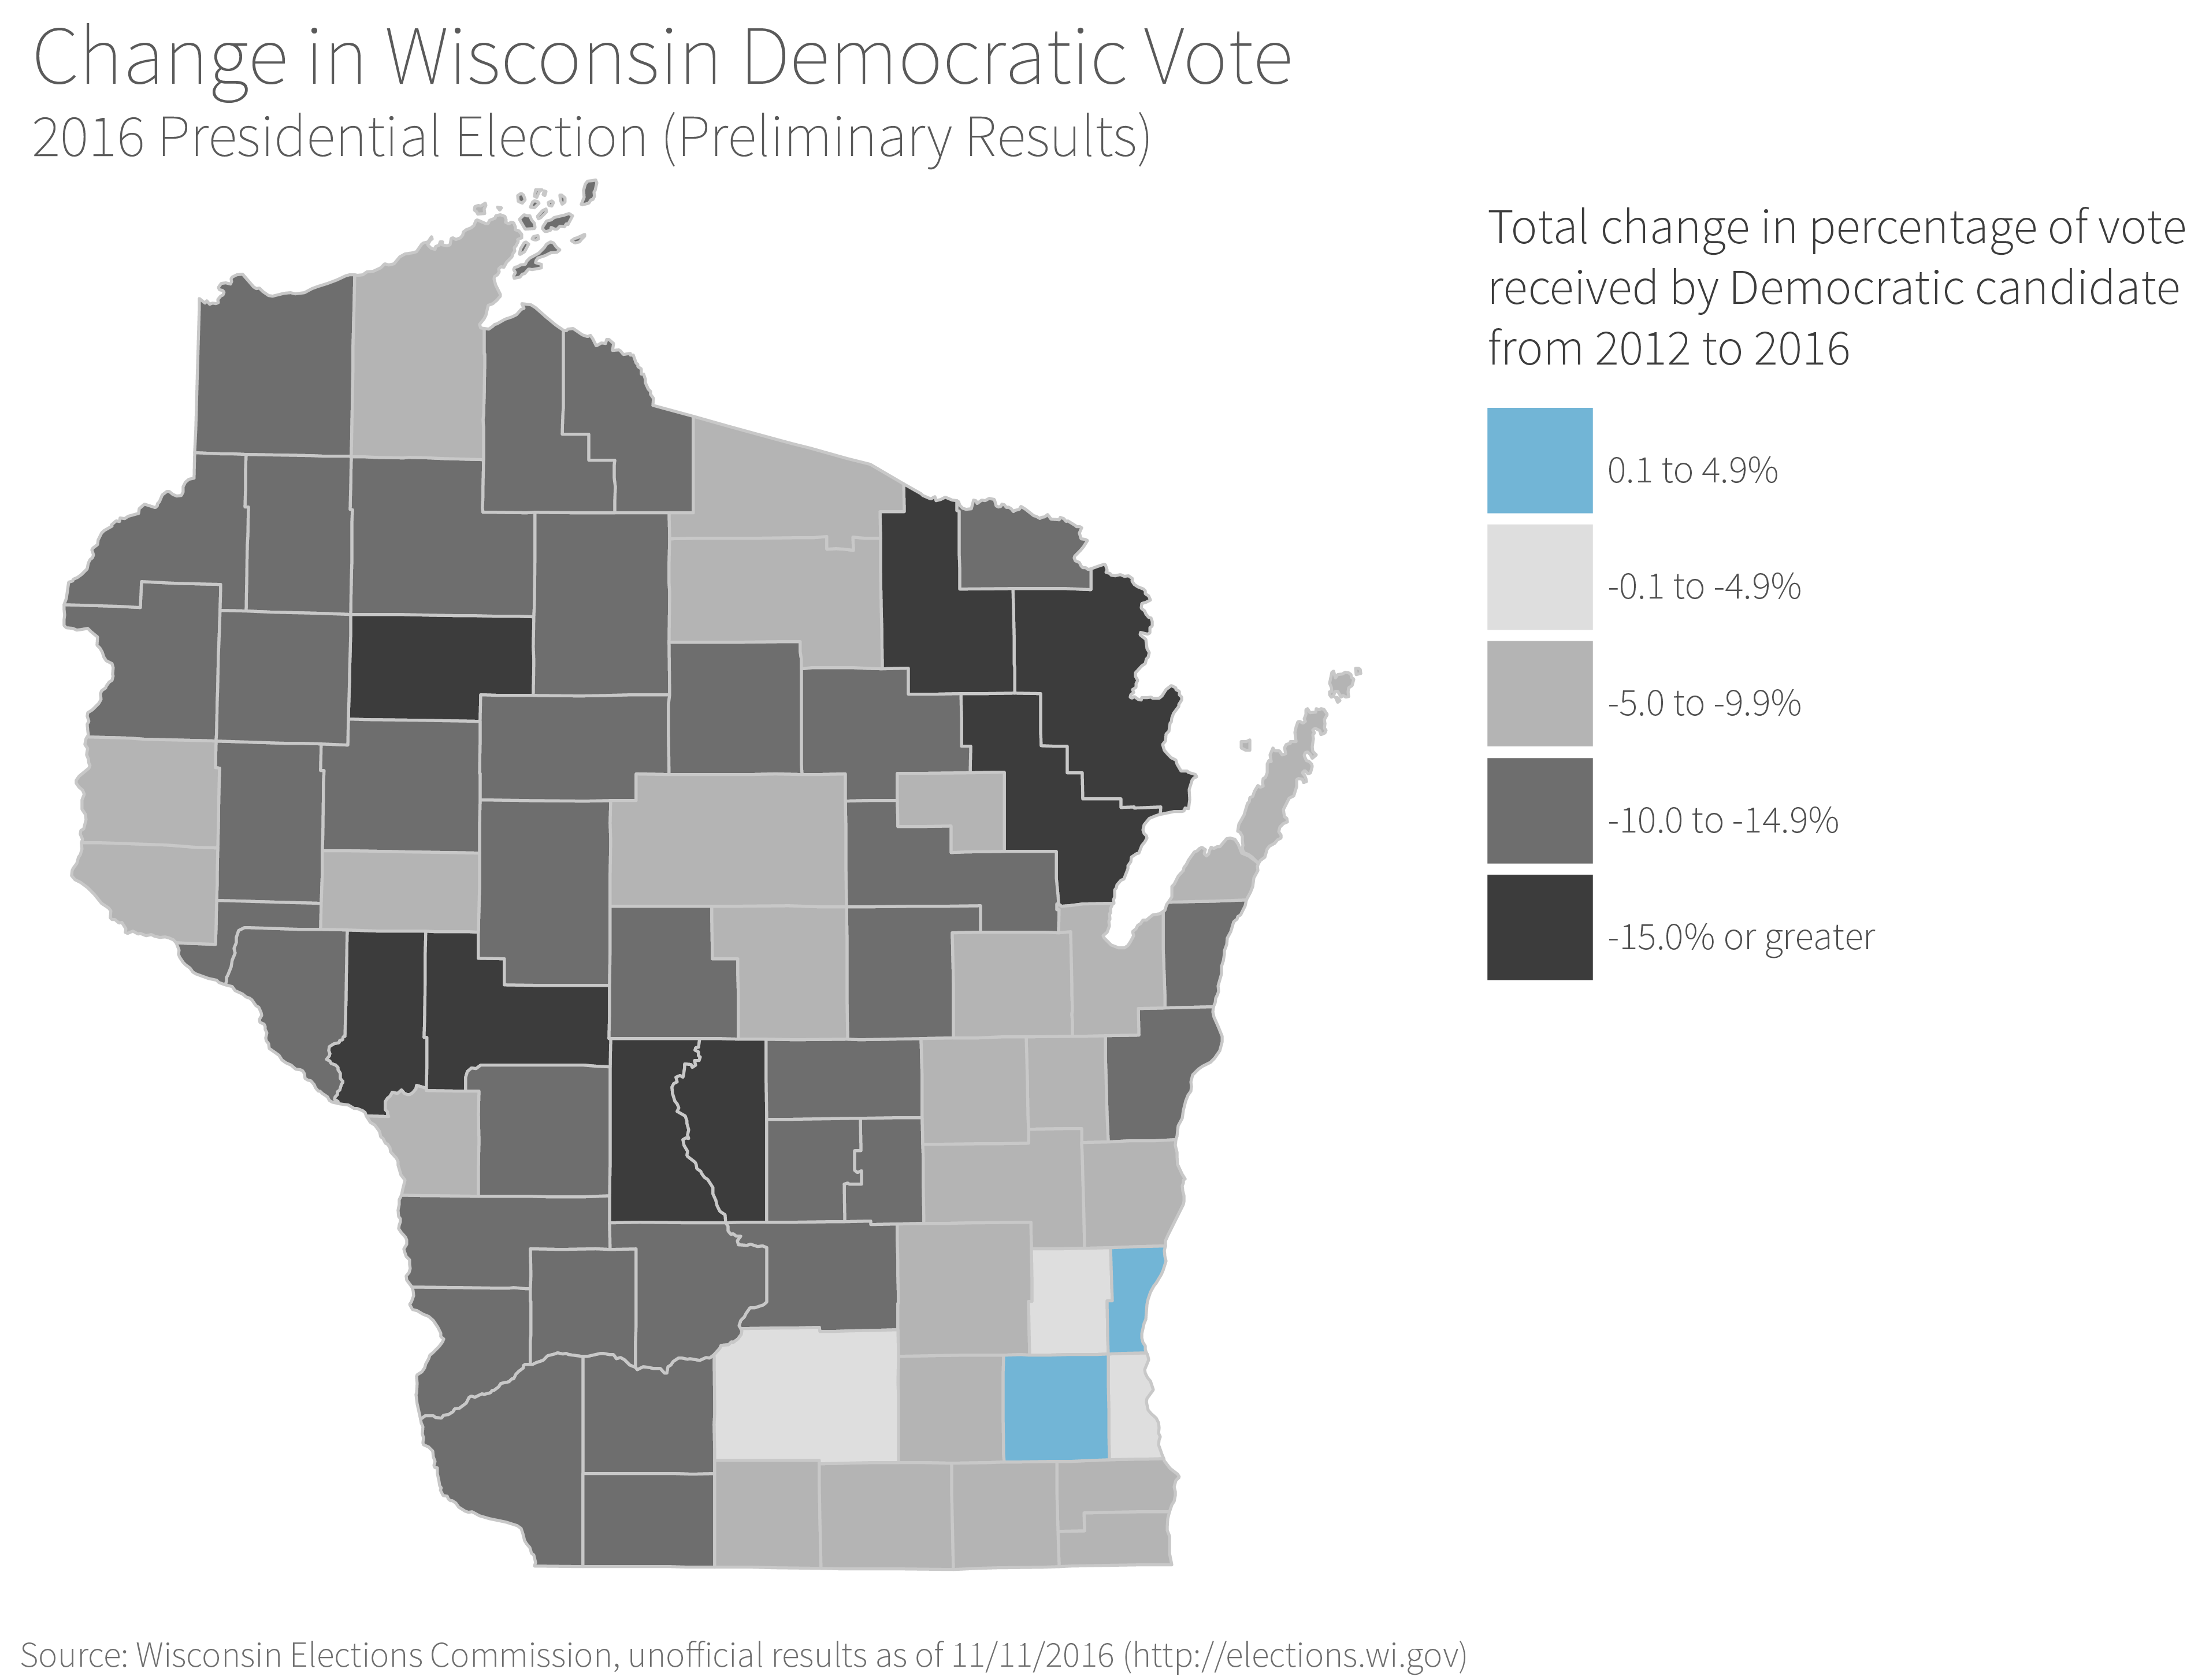 map of Wisconsin showing total change in percentage of vote received by Democratic candidate, 2012 to 2016